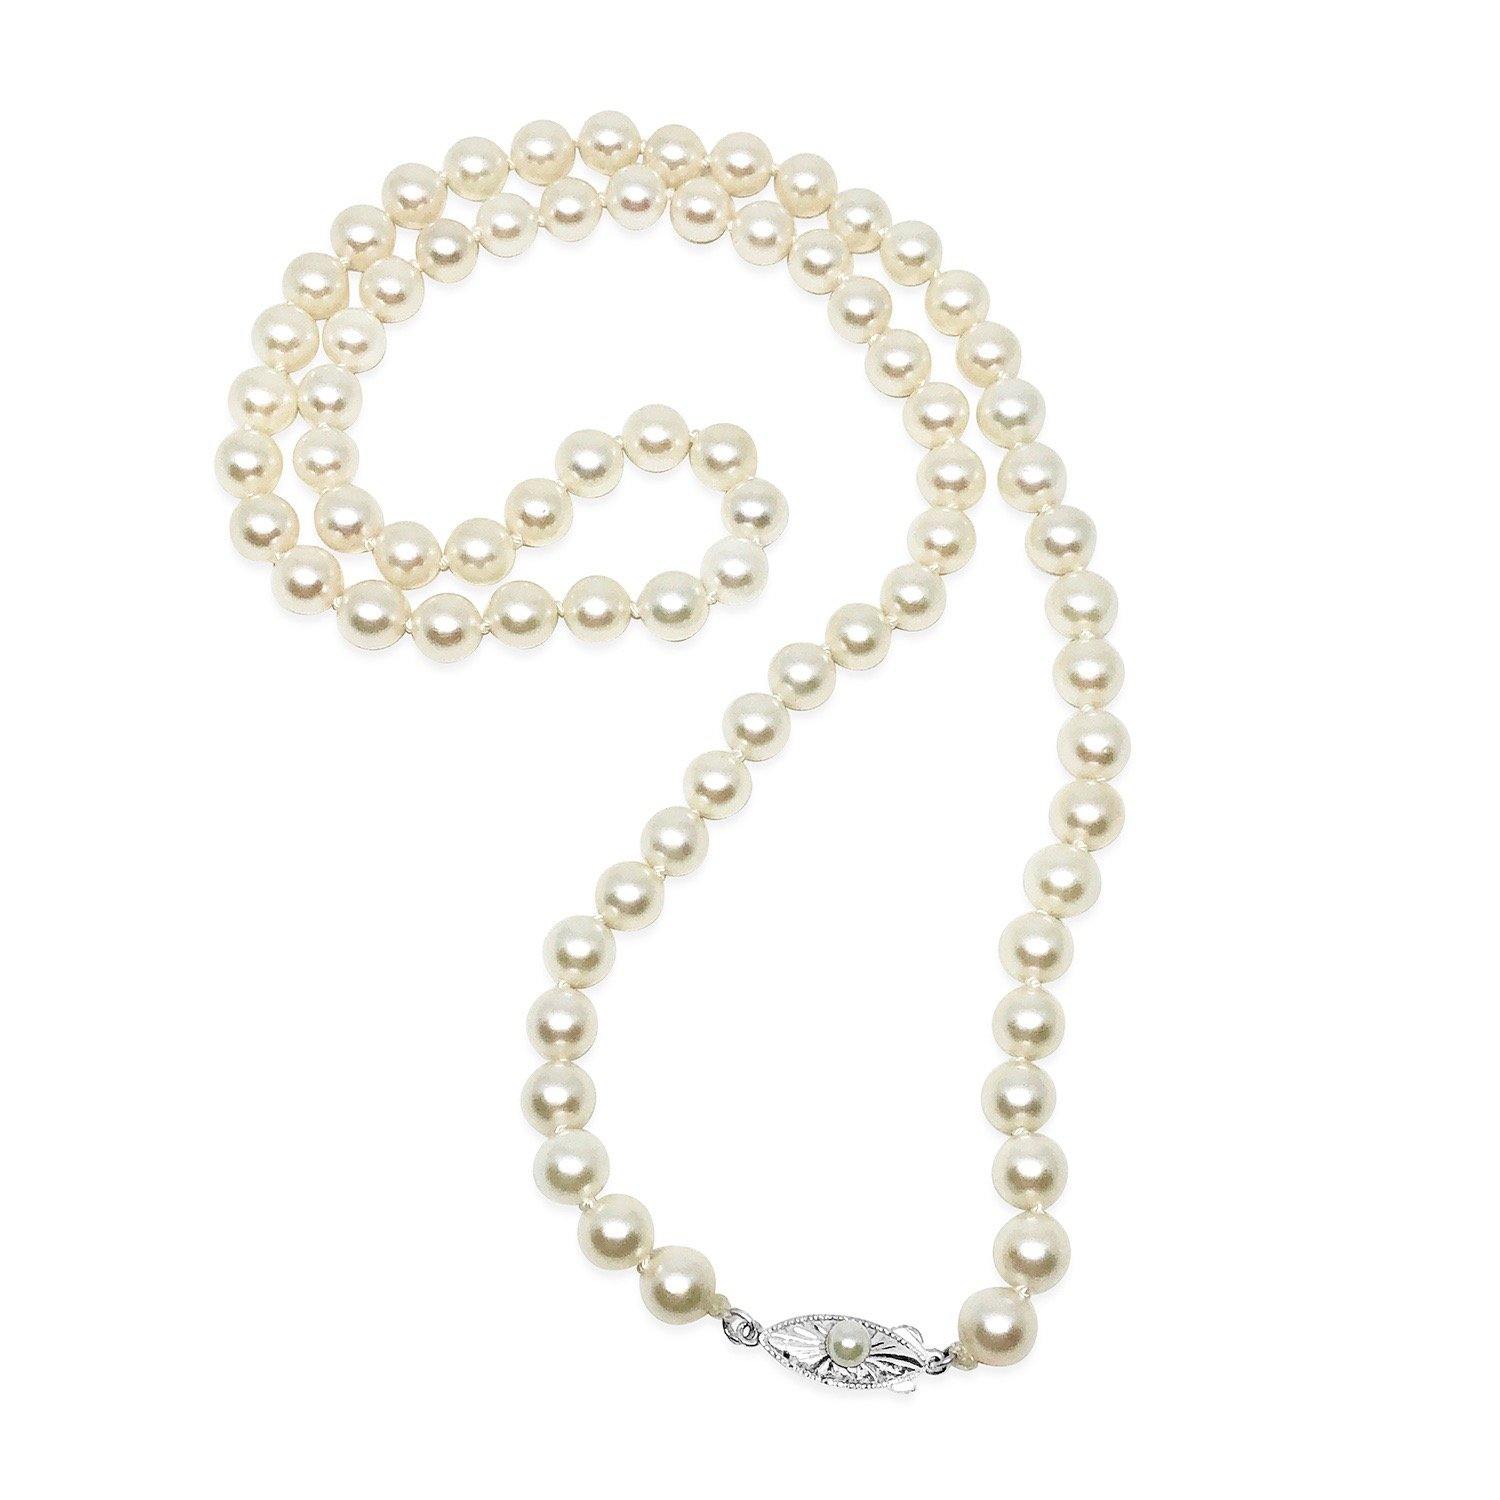 Art Deco Japanese Saltwater Cultured Akoya Pearl Necklace - Sterling Silver